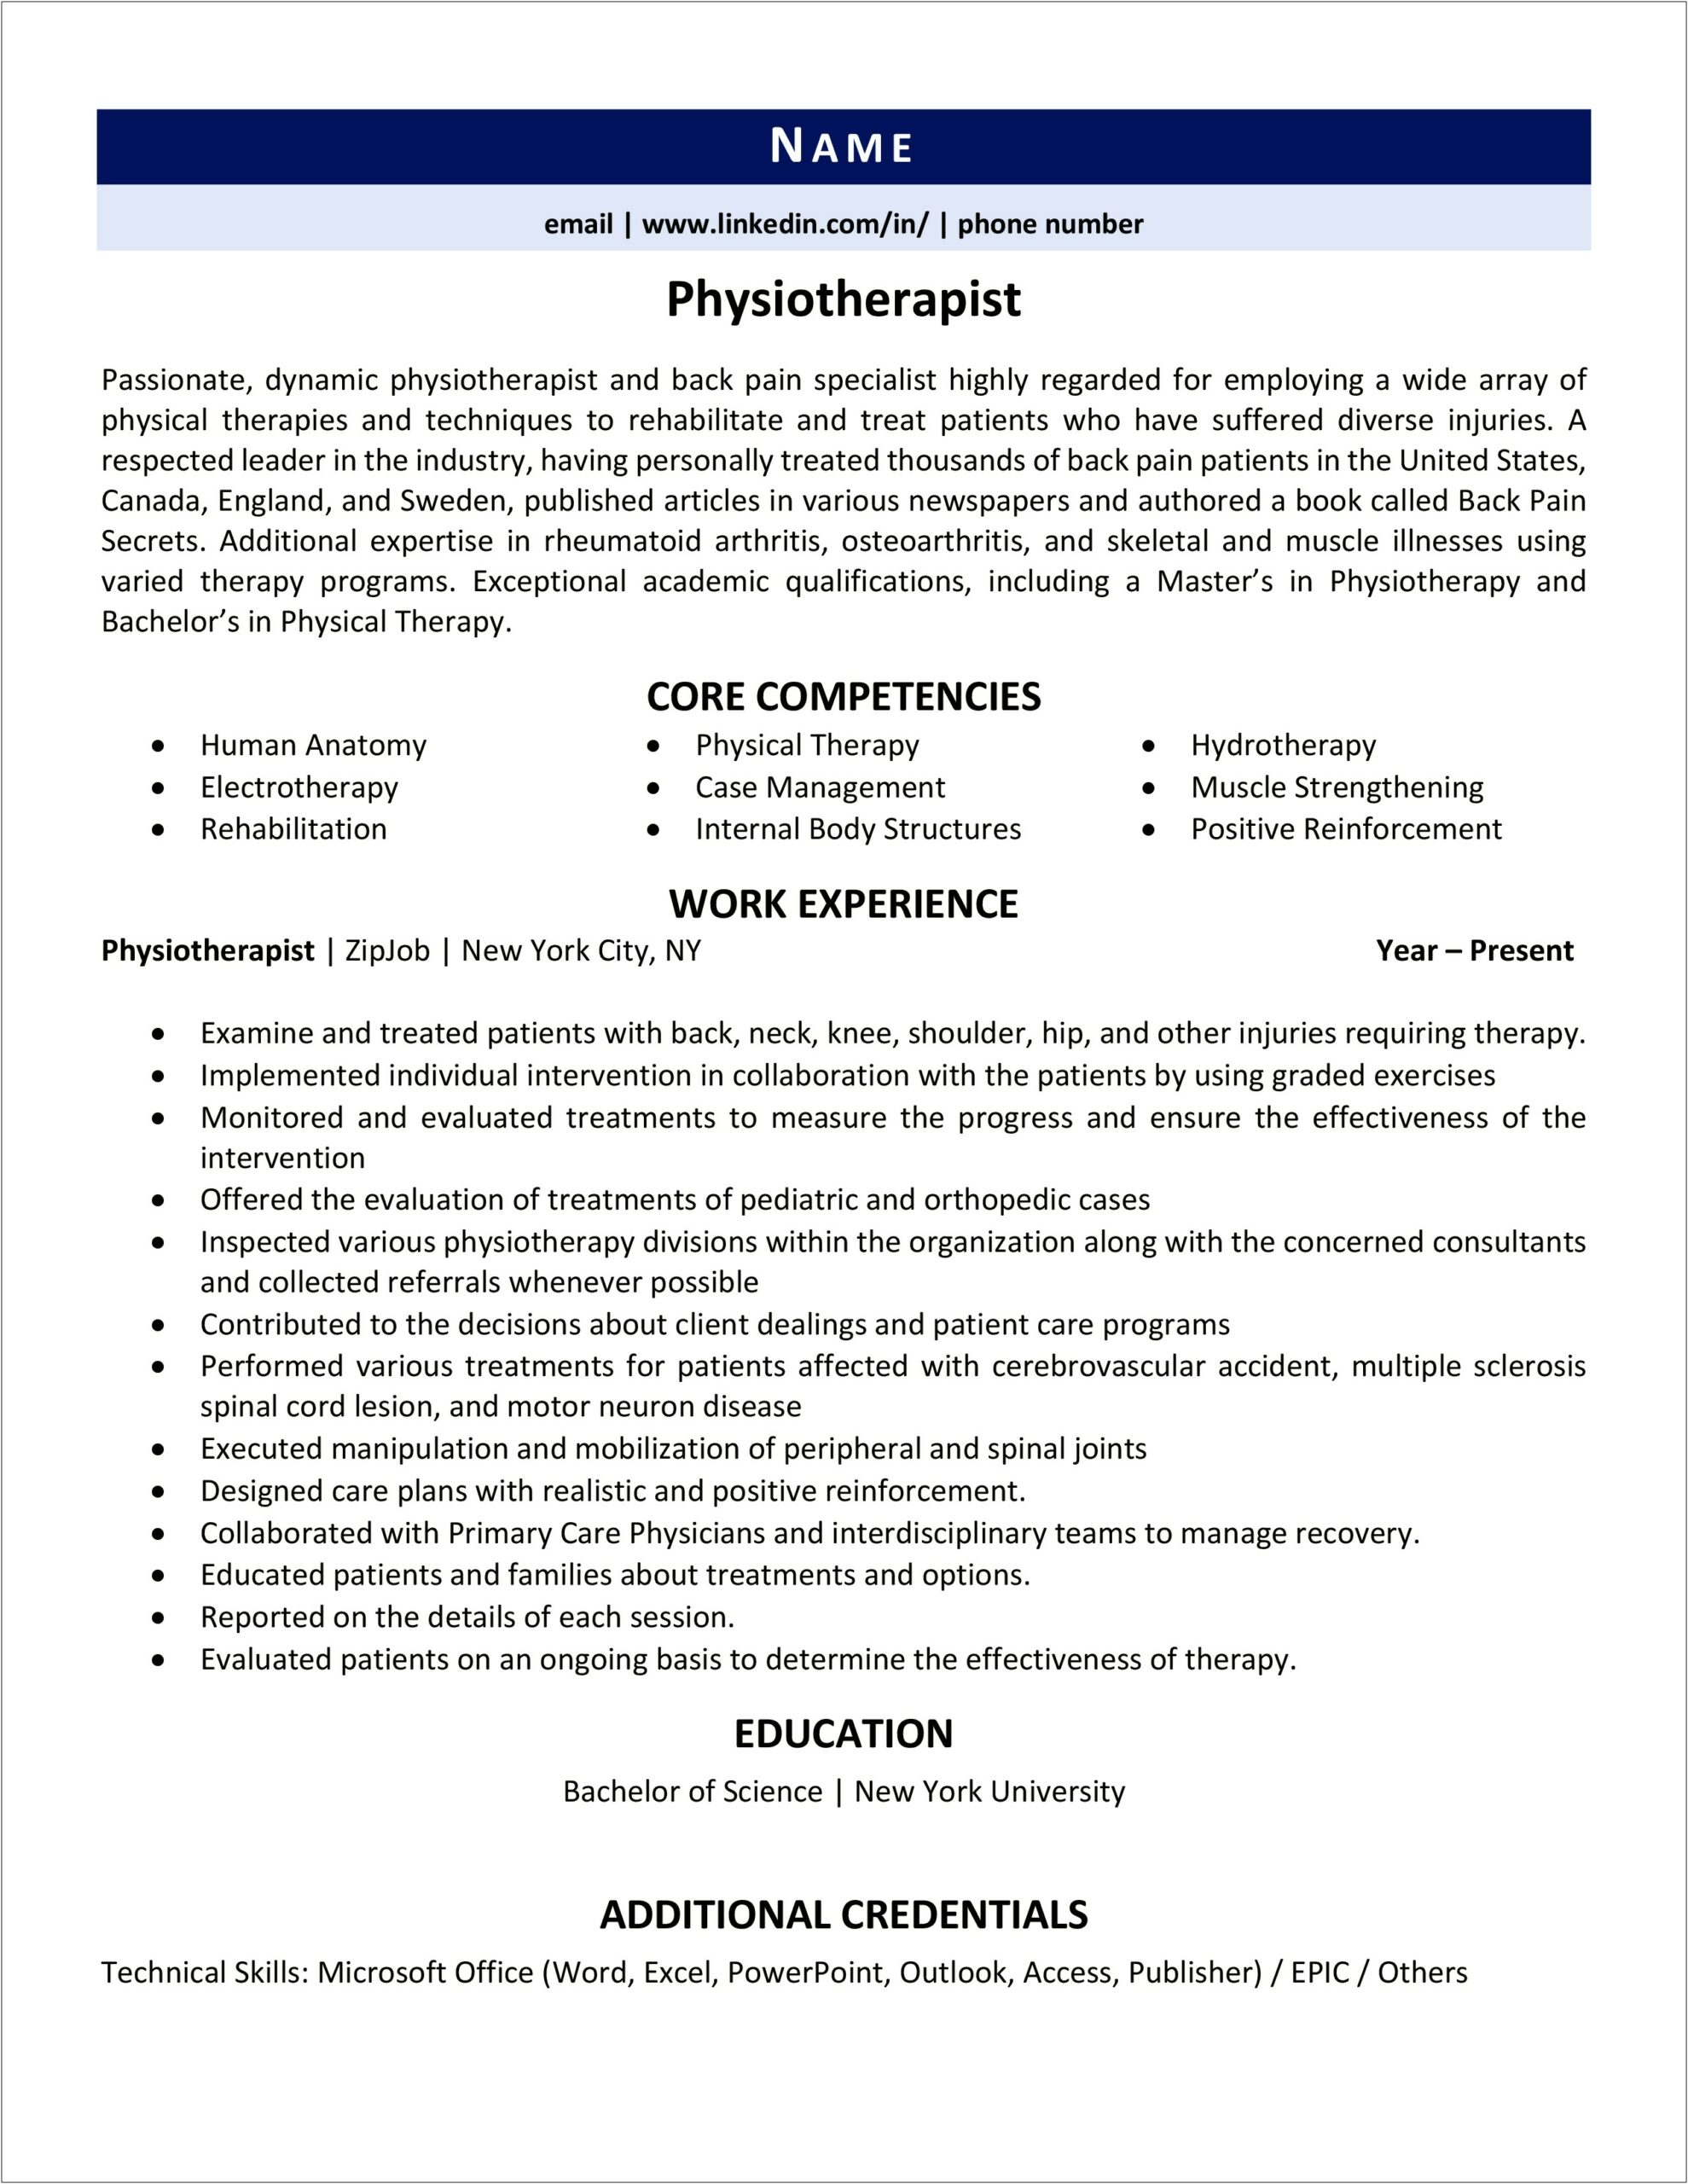 Skills For Physical Therapist For Resume